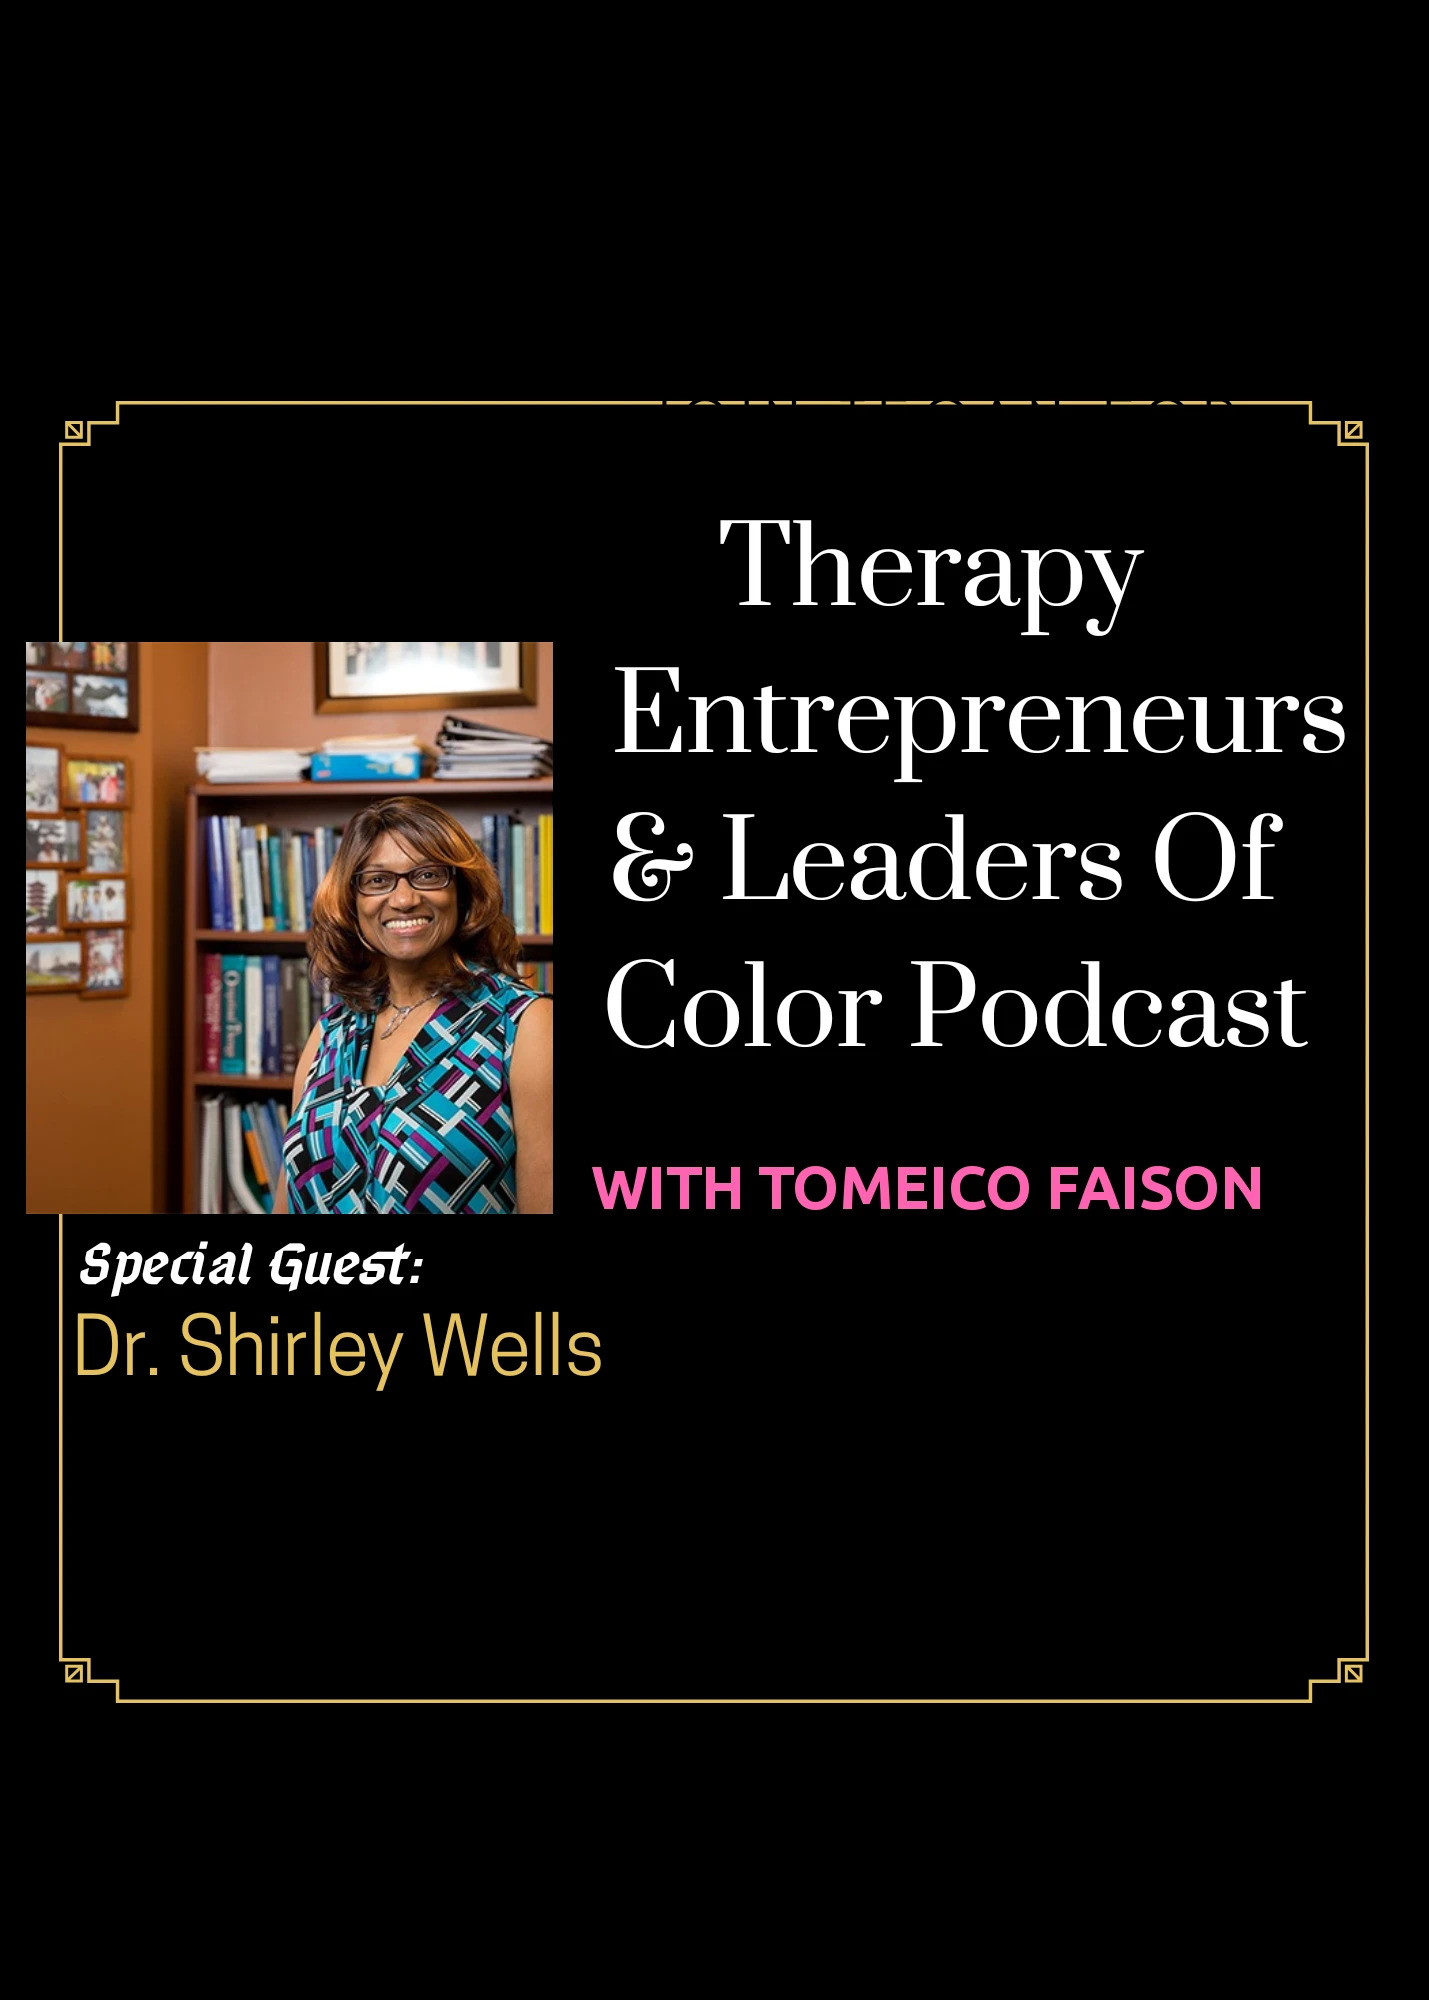 Dr. Shirley Podcast Interview